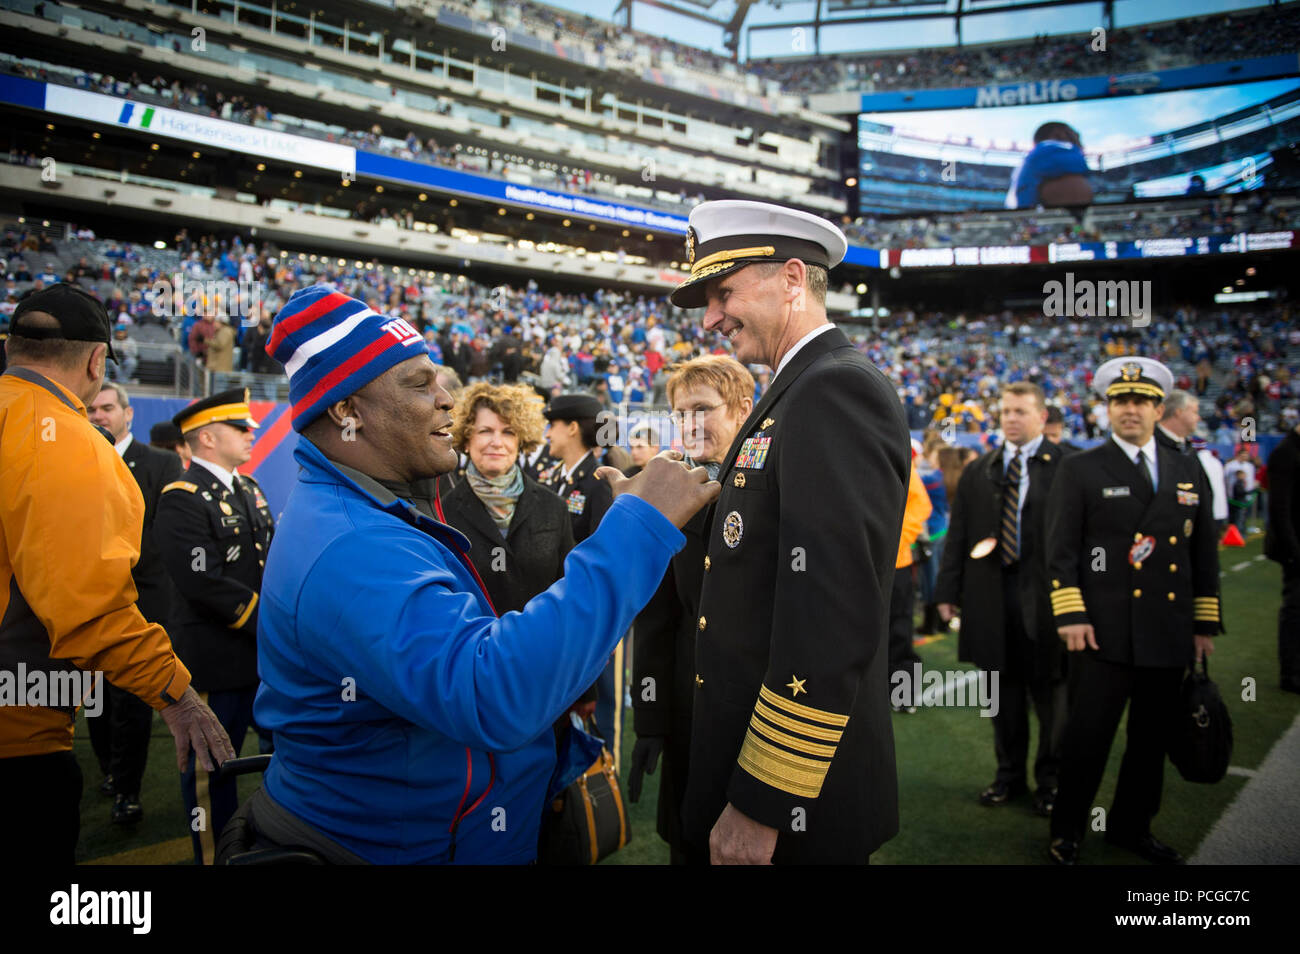 EAST RUTHERFORD, N.J. (Nov. 4, 2012) Chief of Naval Operations (CNO) Adm. Jonathan Greenert talks with Army Col. Gregory D. Gadson, base commander of Fort Belvoir, Va., and a double amputee who stared in the movie 'Battleship,' at a NFL military appreciation game at Metlife Stadium. The NFL chose November in conjunction with Veteran's Day to honor the military with their 'Salute to Service' campaign, highlighting service members' contribution to our nation. Stock Photo